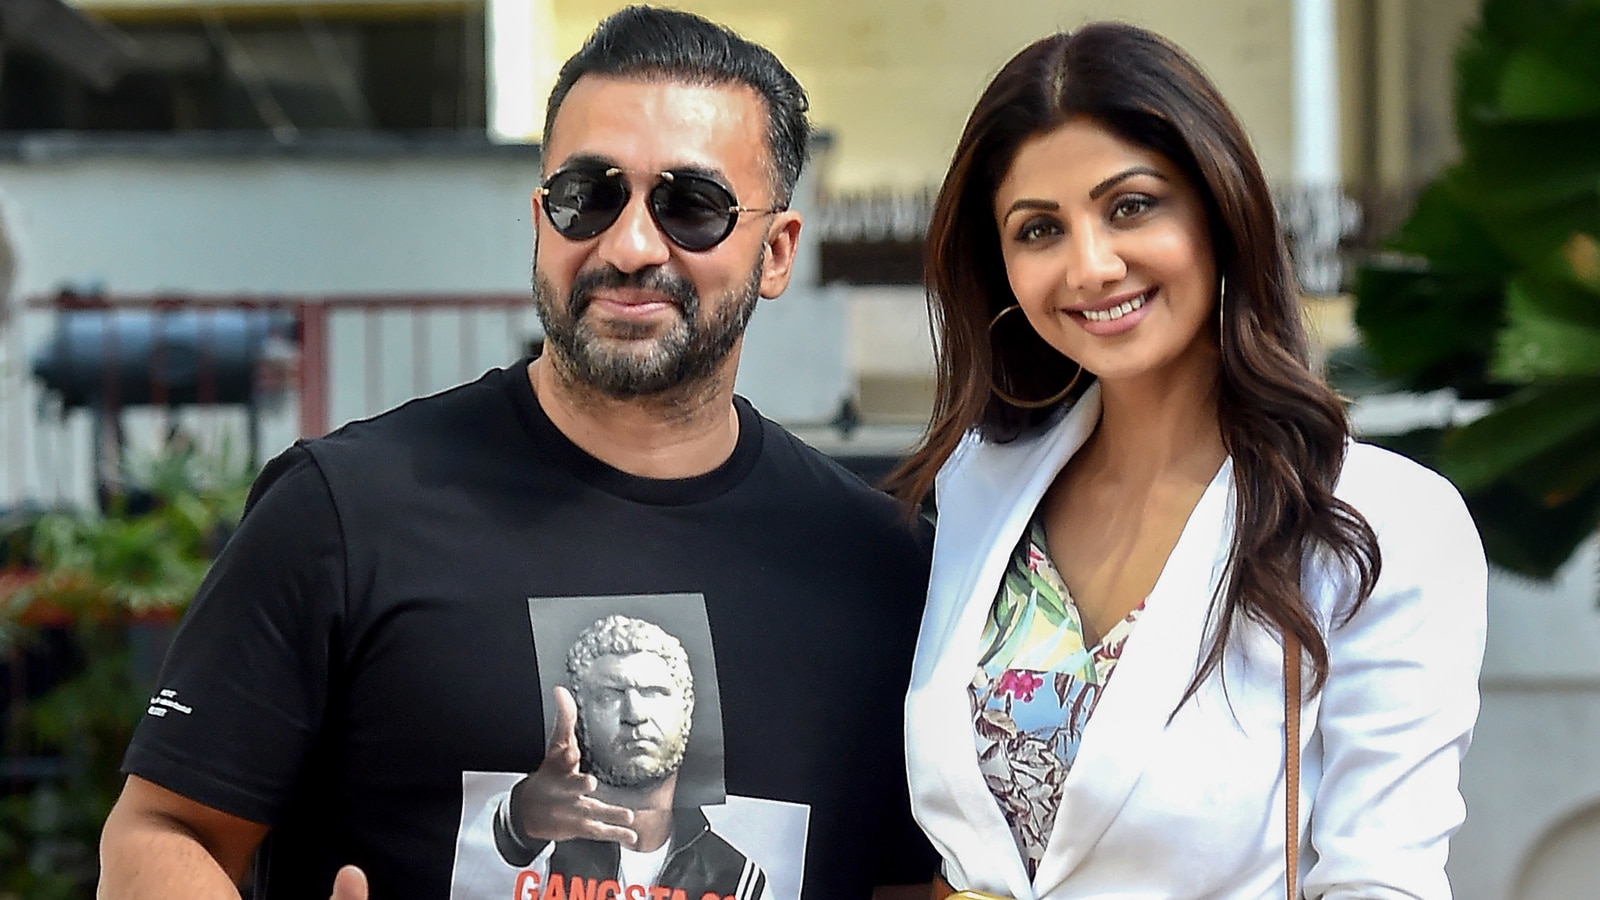 Silpaseti Sex - Actor Shilpa Shetty's husband Raj Kundra arrested for making porn: What we  know so far | Latest News India - Hindustan Times